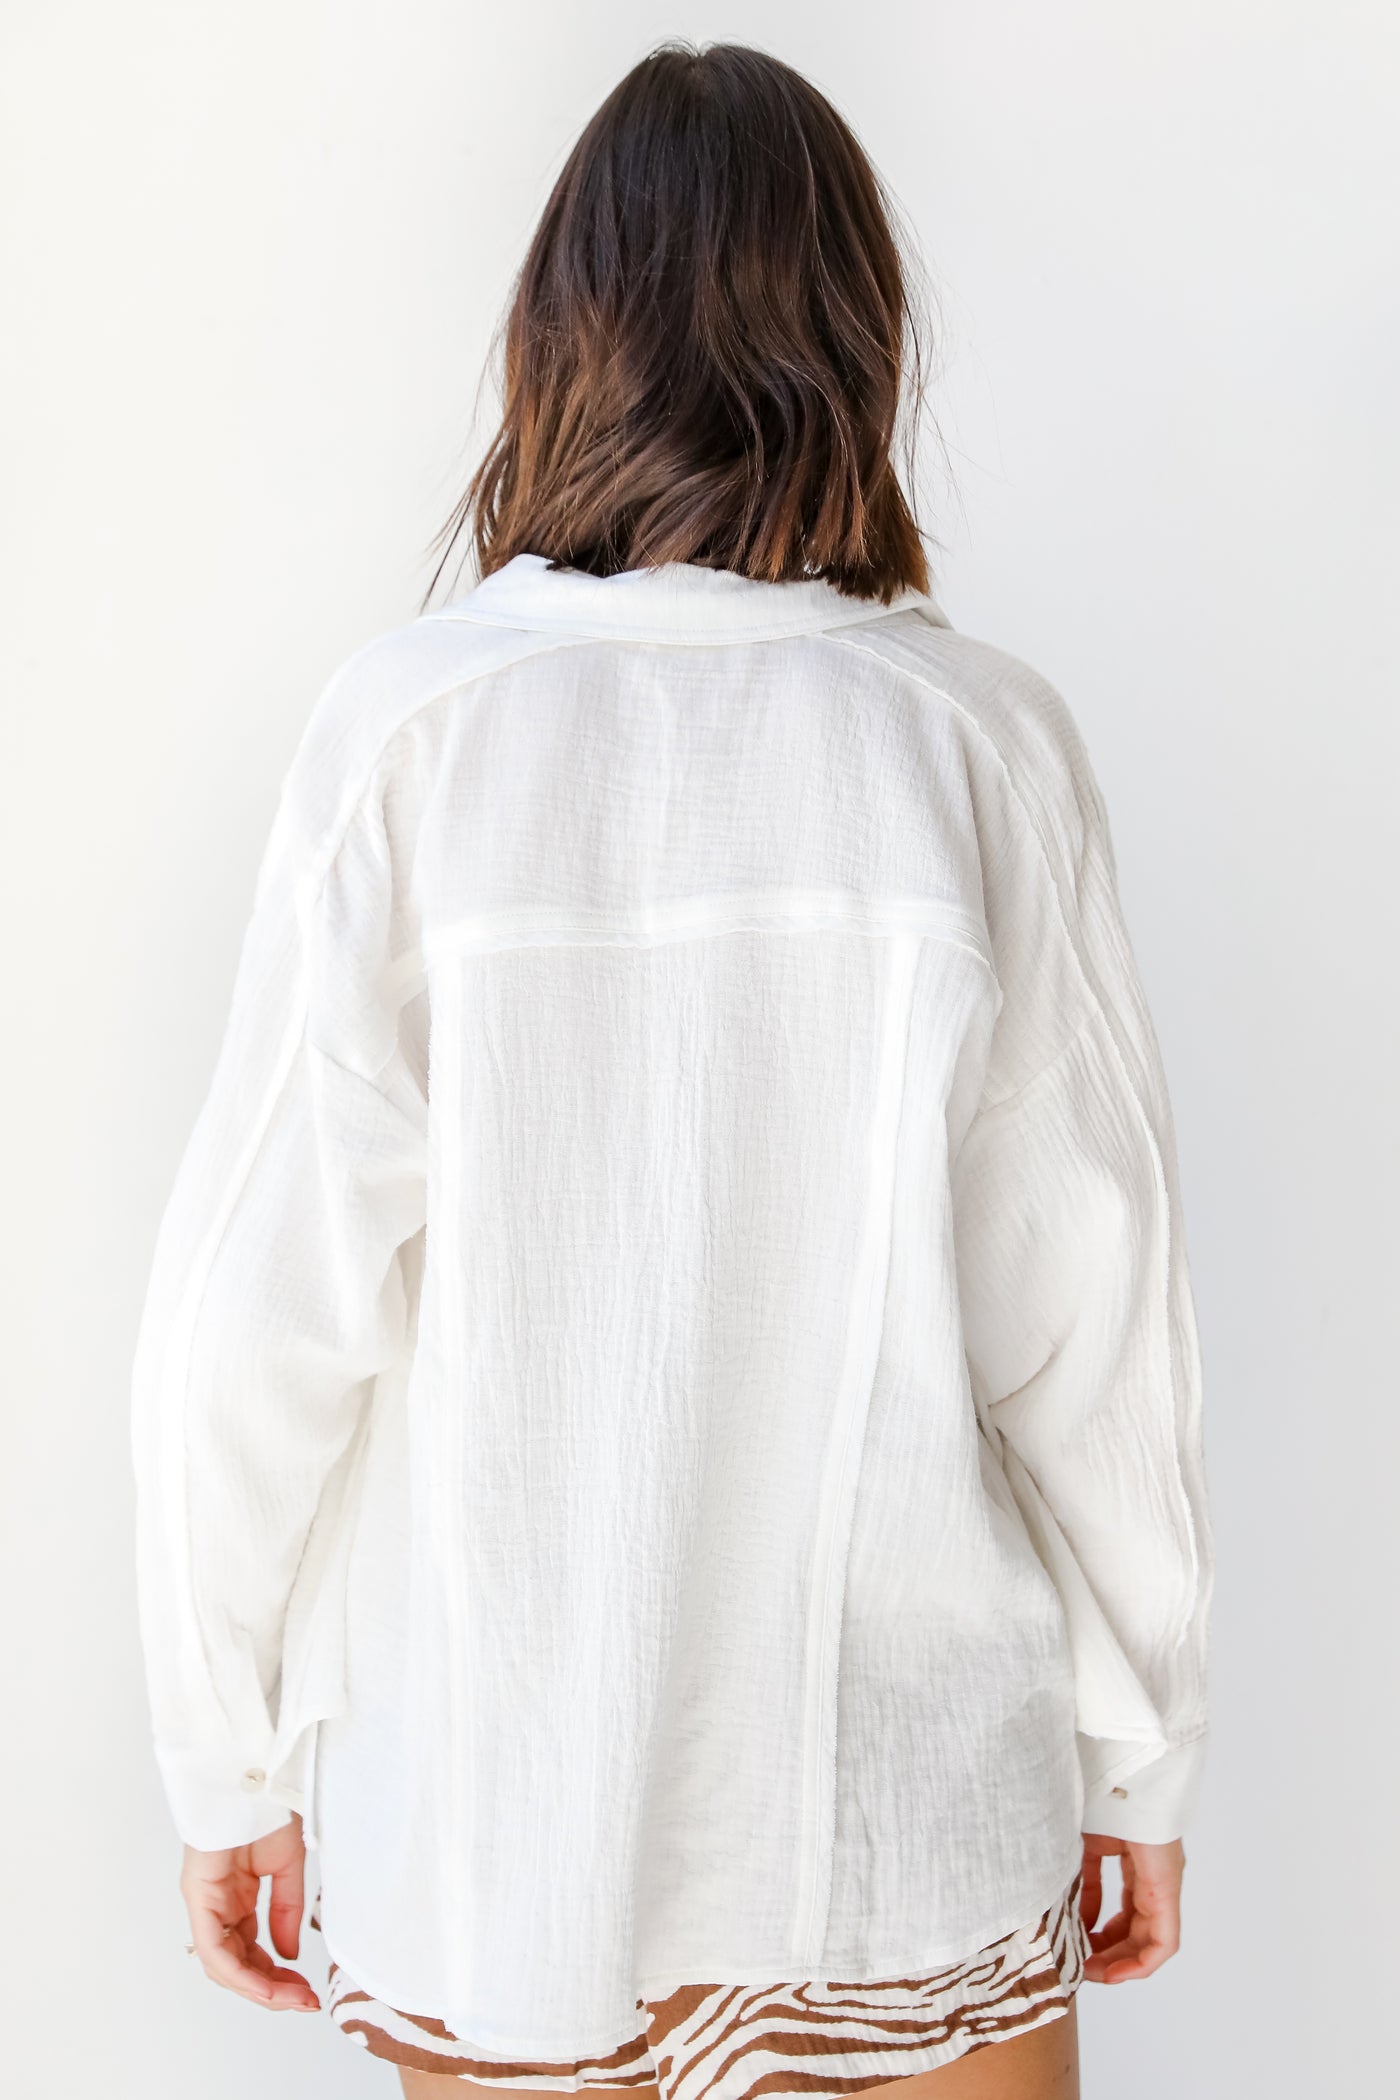 Linen Button-Up Blouse in white back view